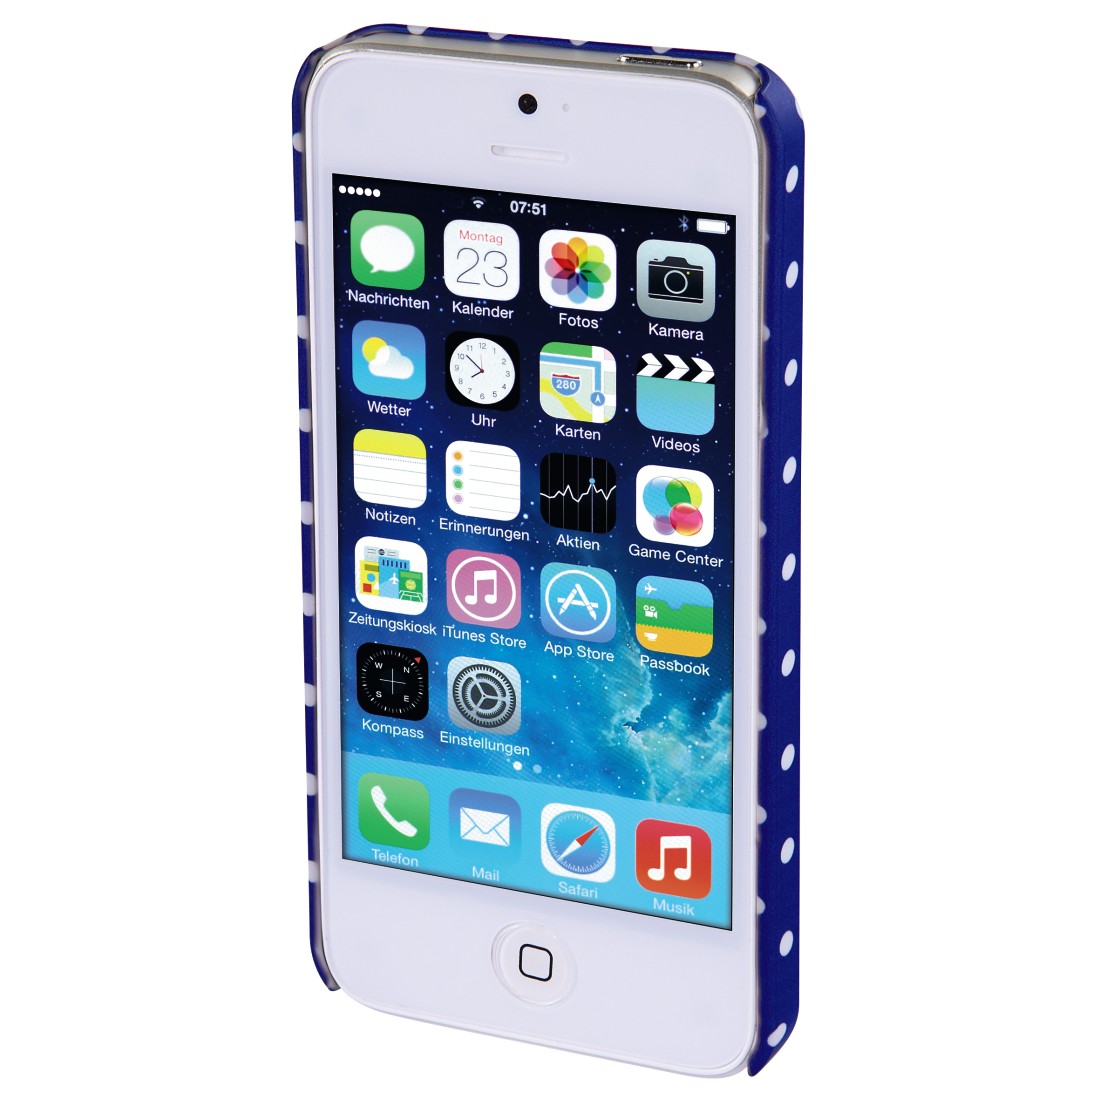 4s blue and white